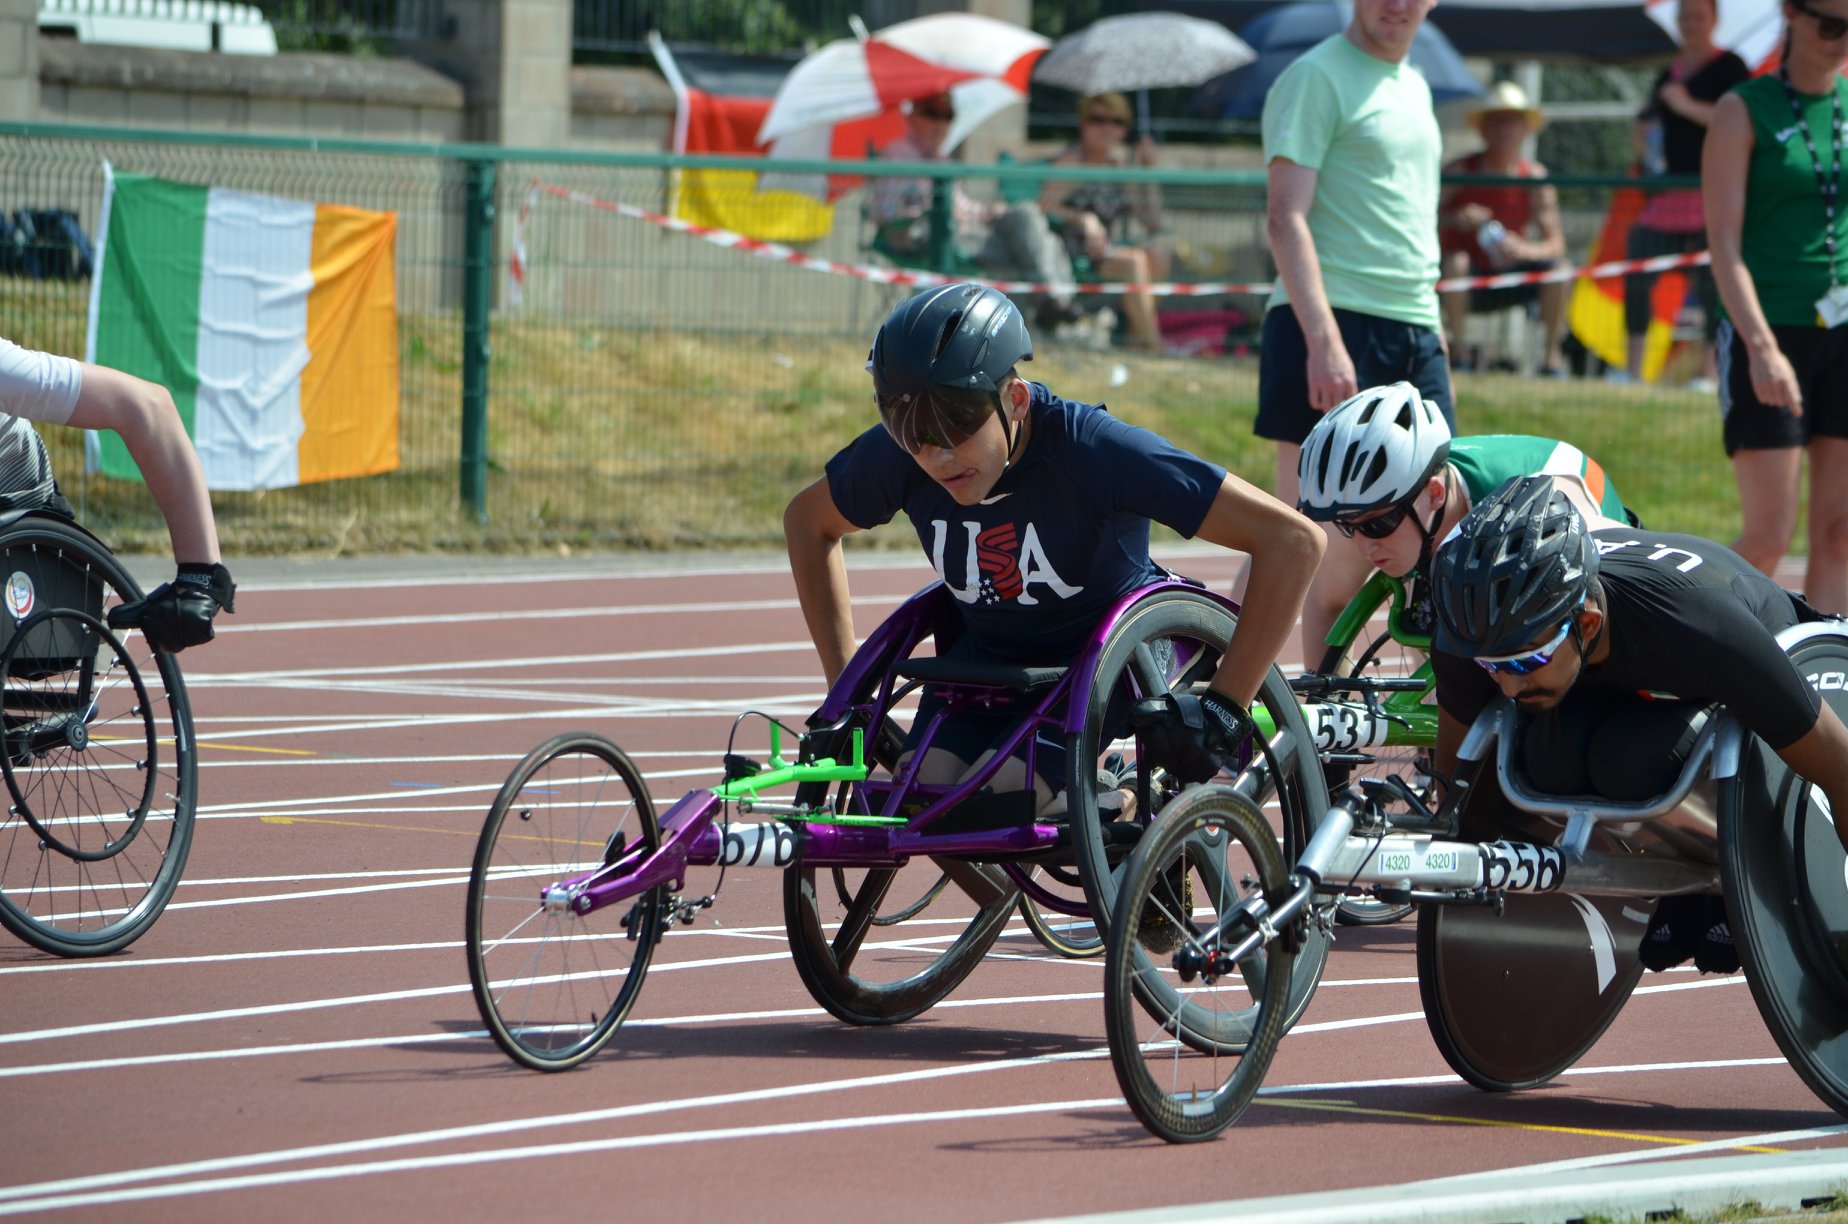 Group of people participating in wheelchair racing on an outdoor track